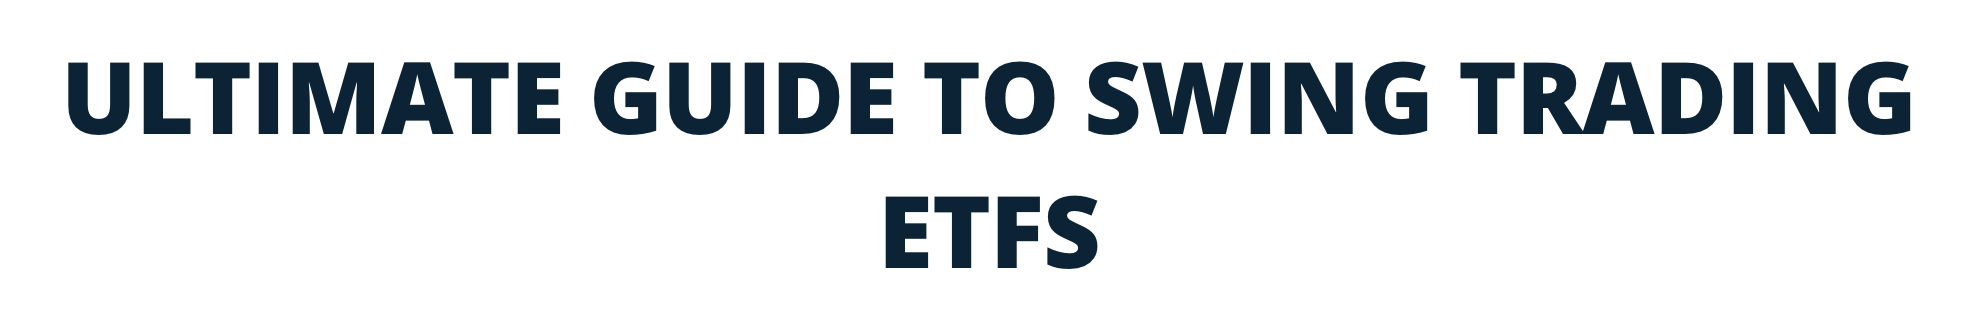 Ultimate Guide To Swing Trading ETFs